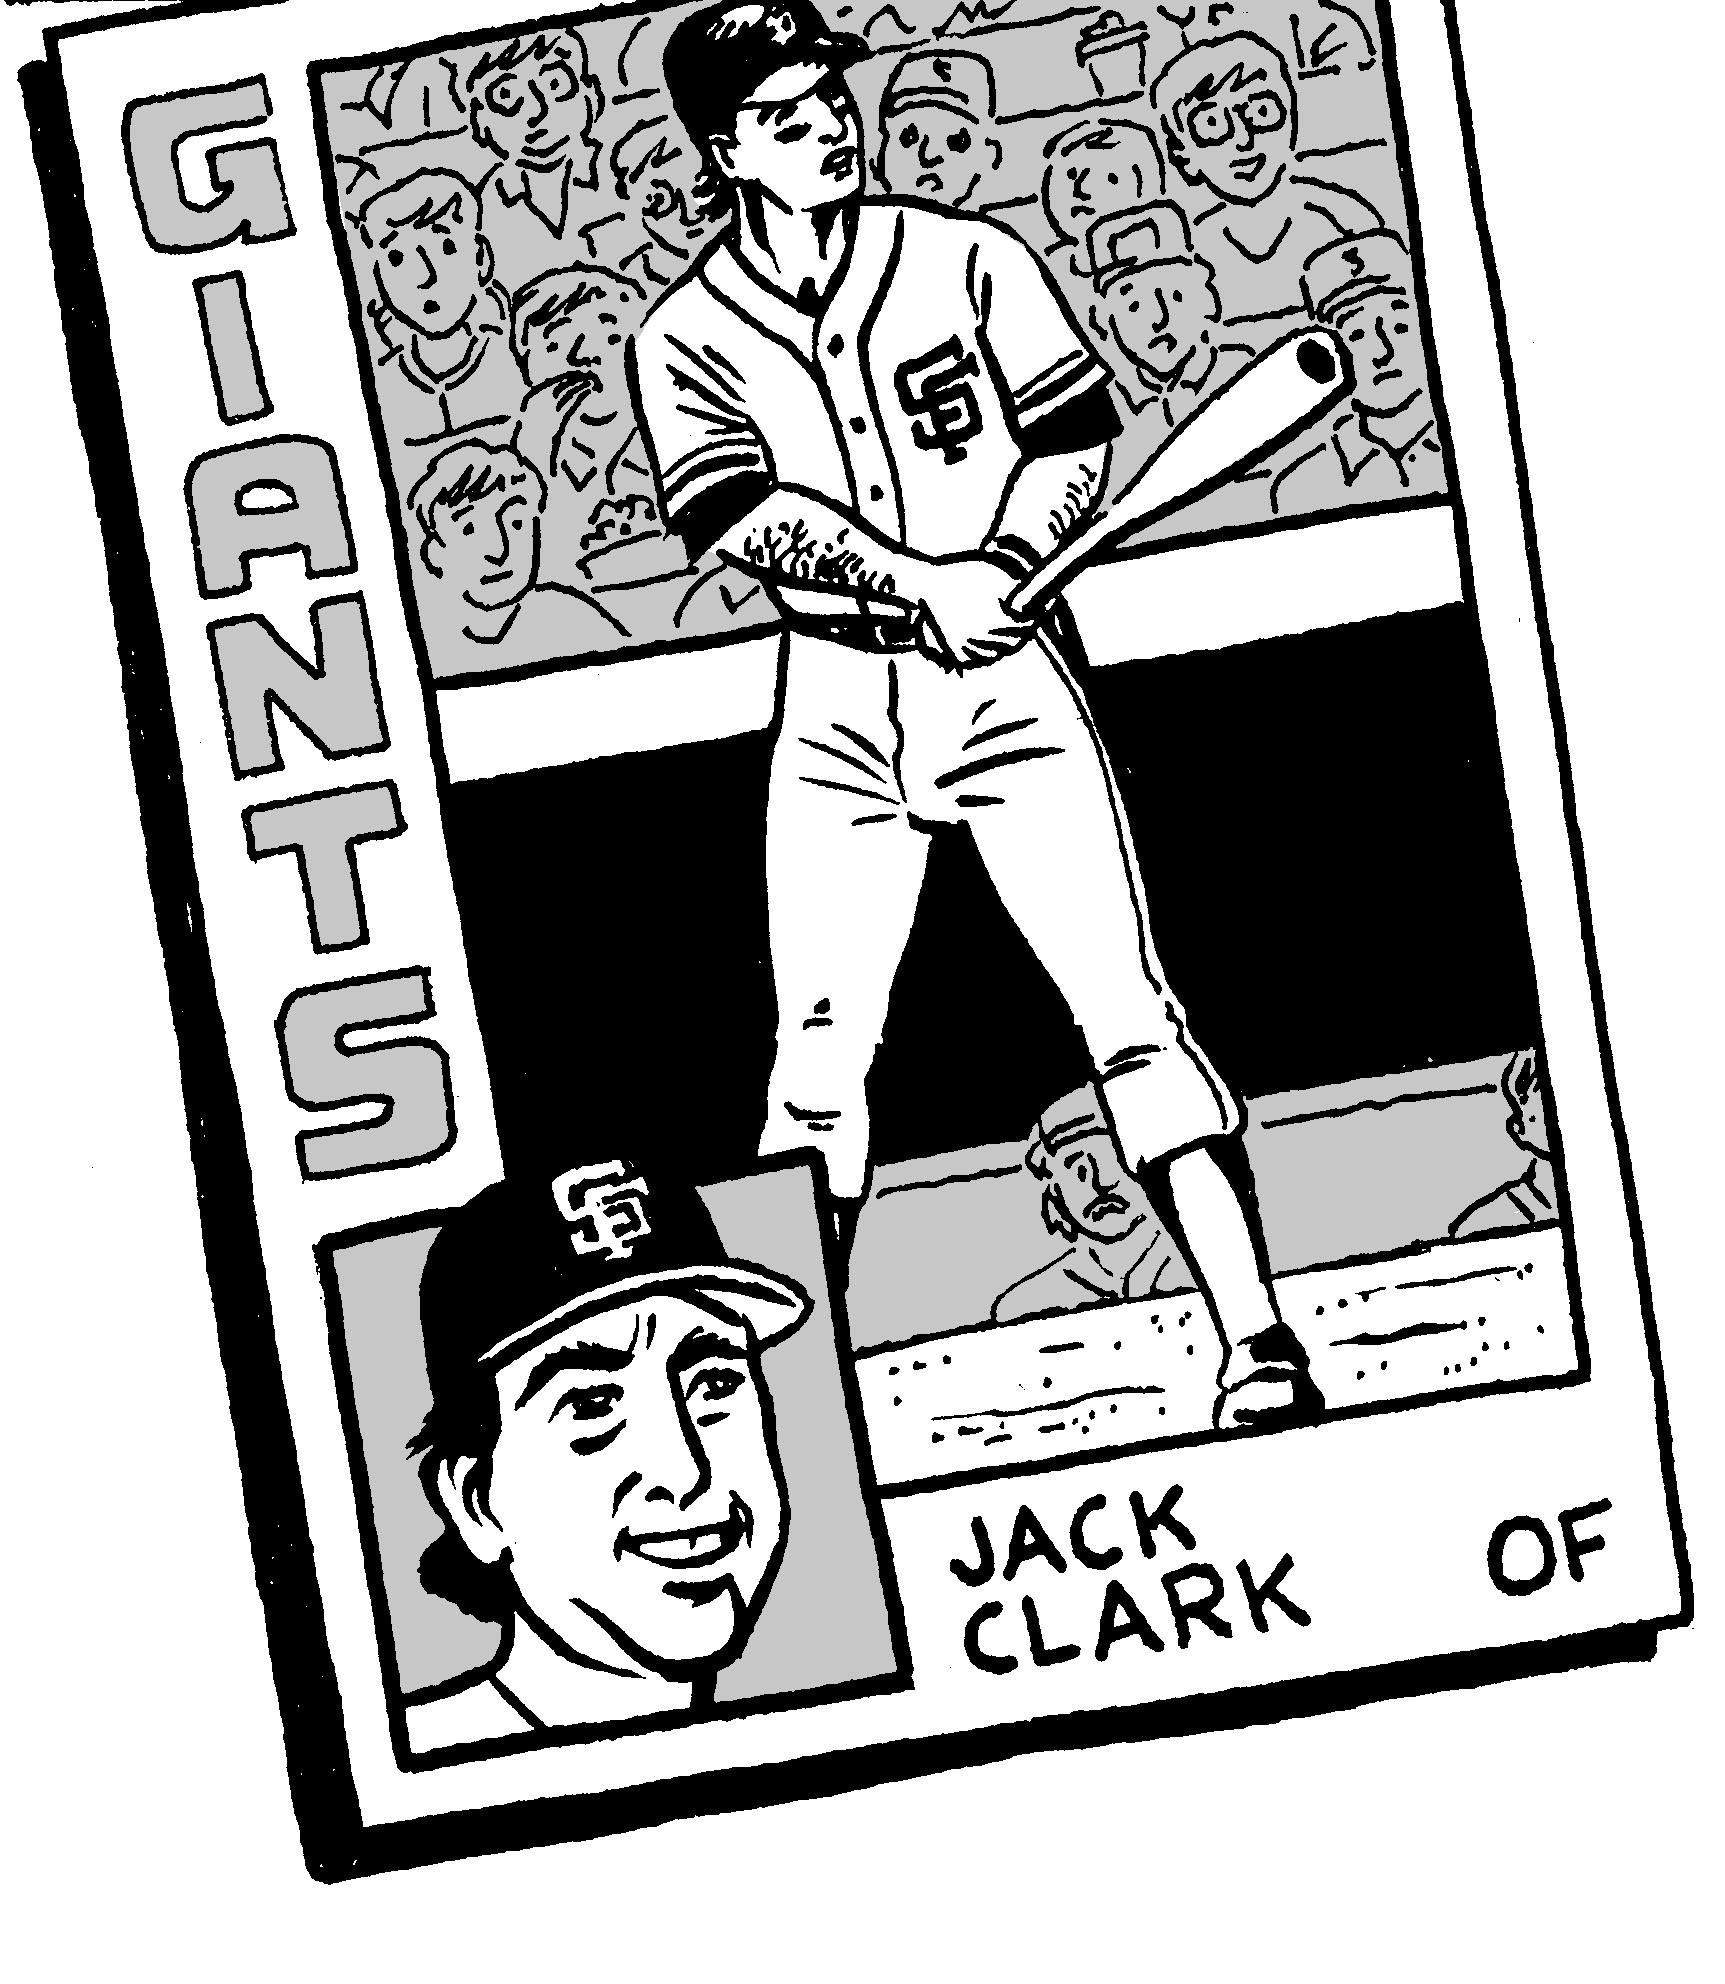 Will Clark announces jersey retirement ceremony on KNBR – KNBR